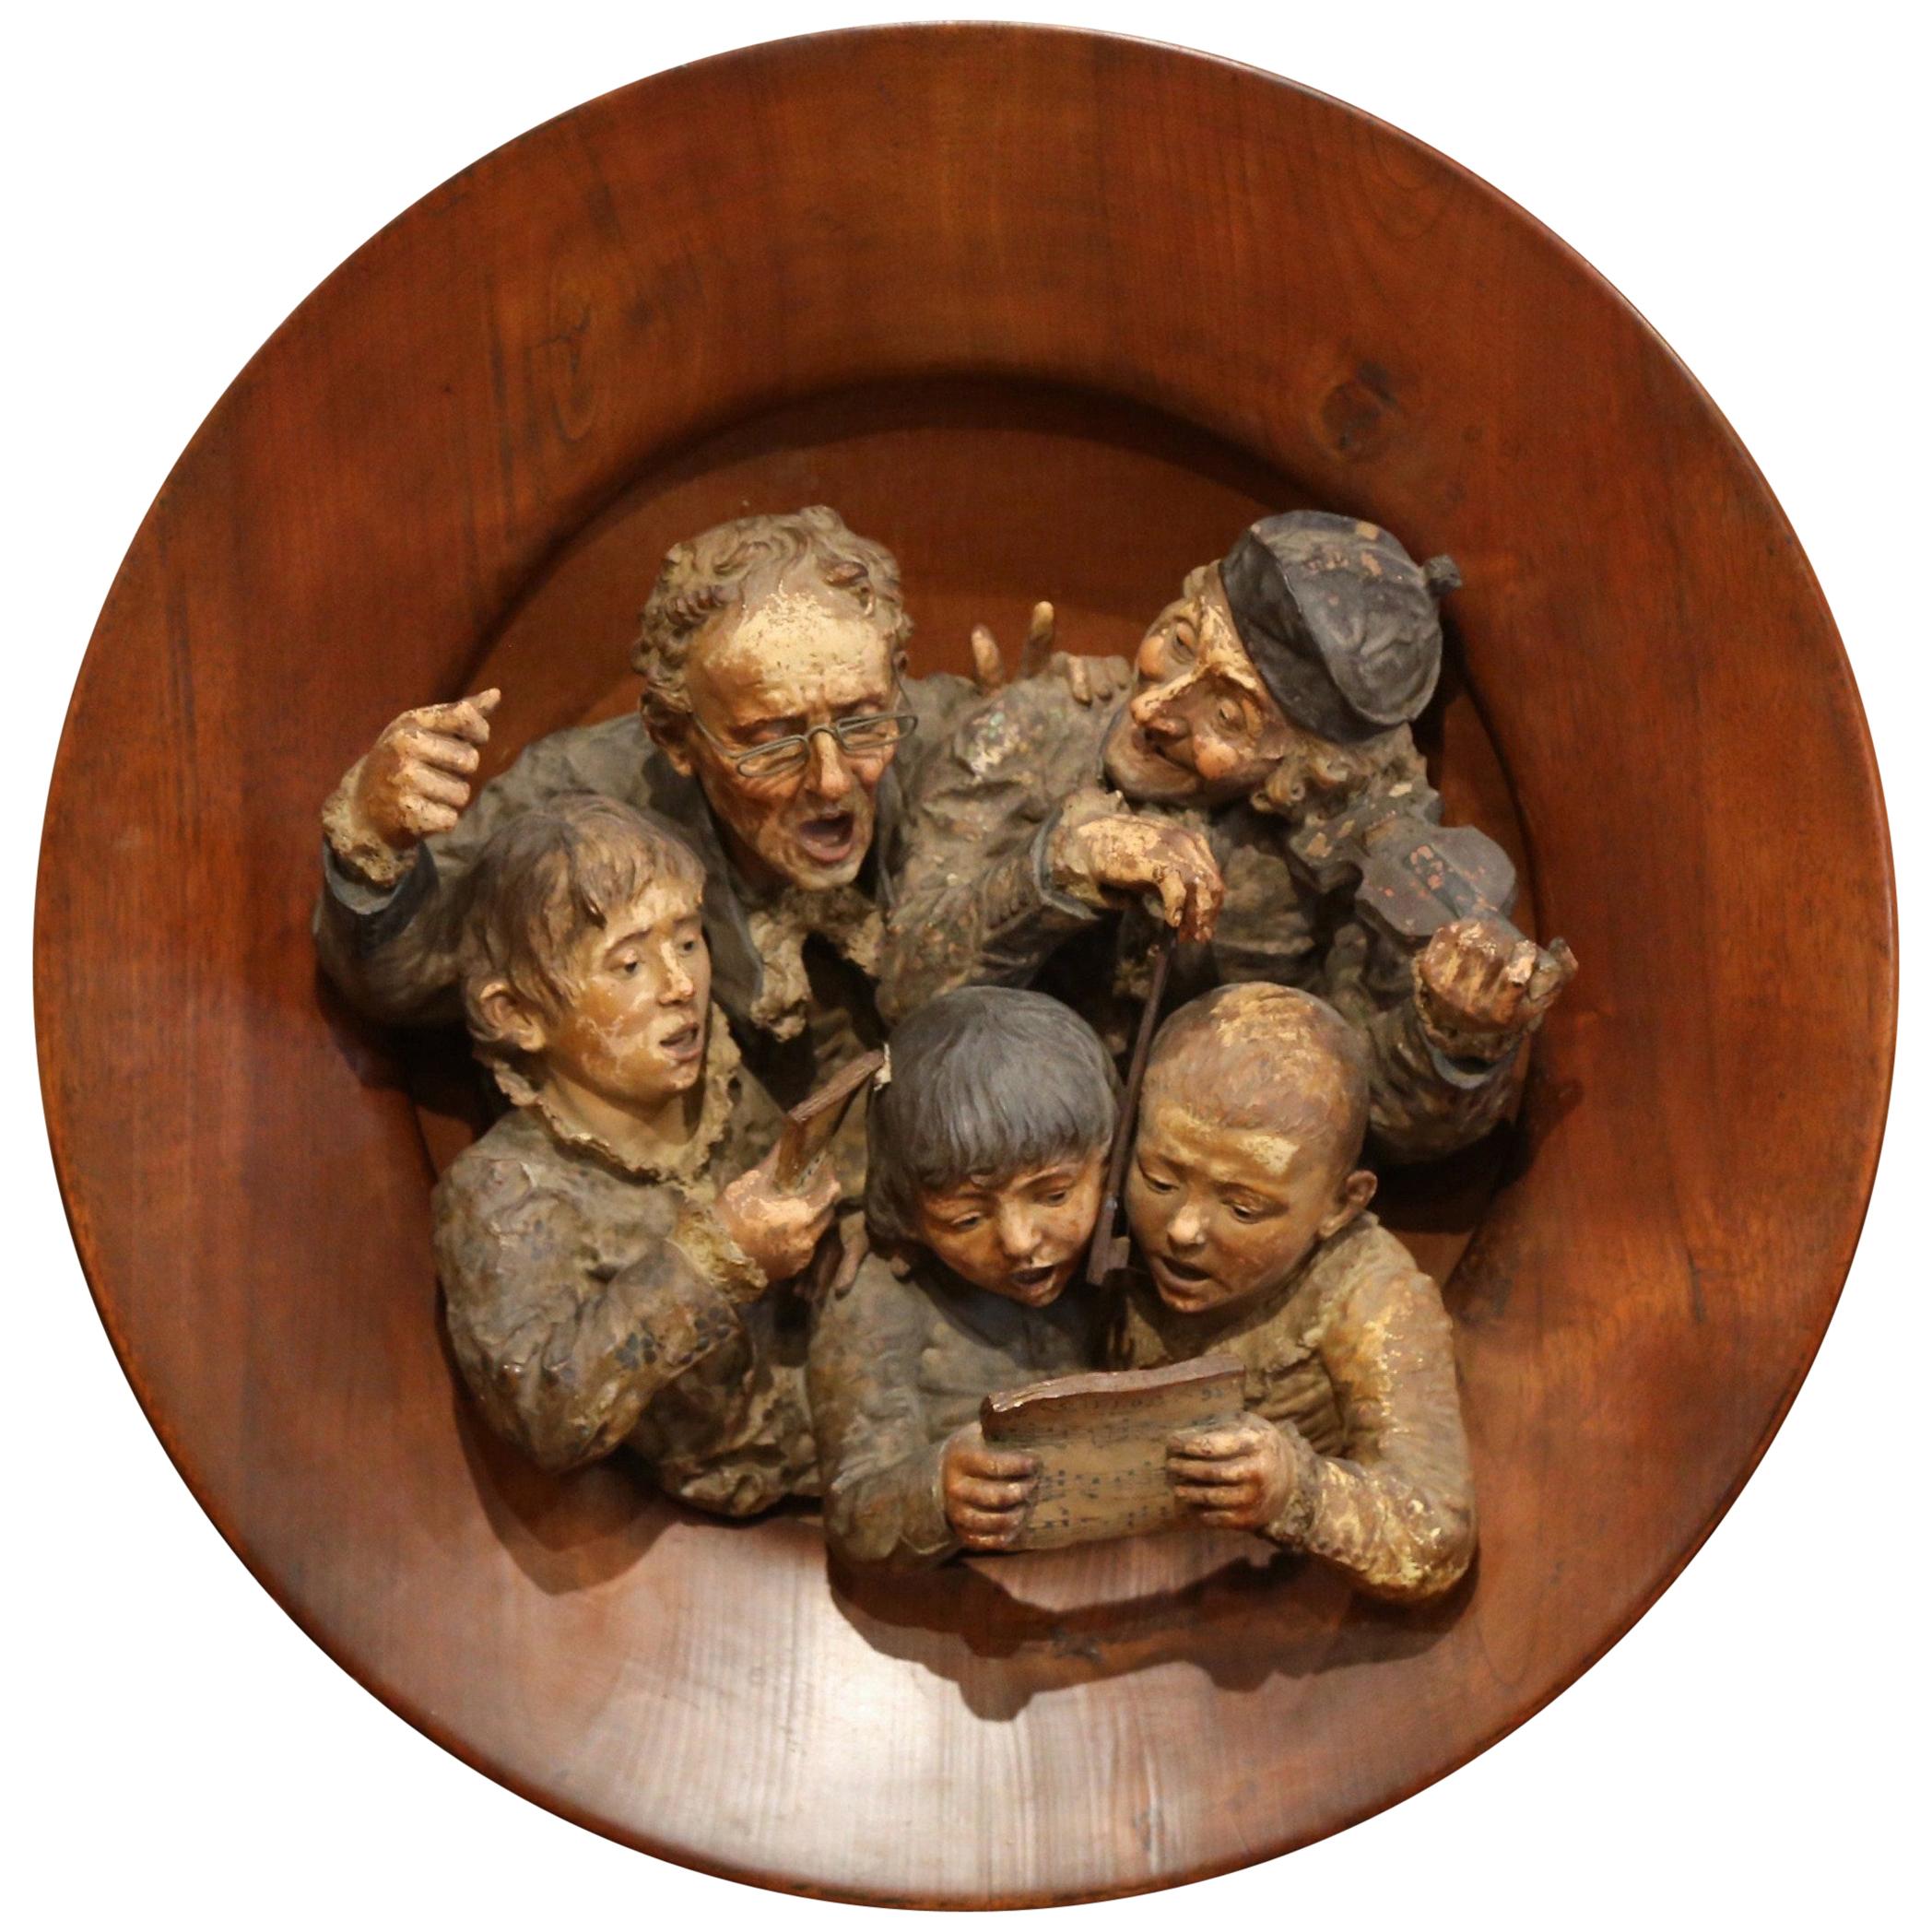 Decorate a wall in a study or game room with this exquisite terracotta wall composition. Crafted in France circa 1880, the large sculpture sits inside a large round wooden frame, it features a choir of five people carved in high relief (three